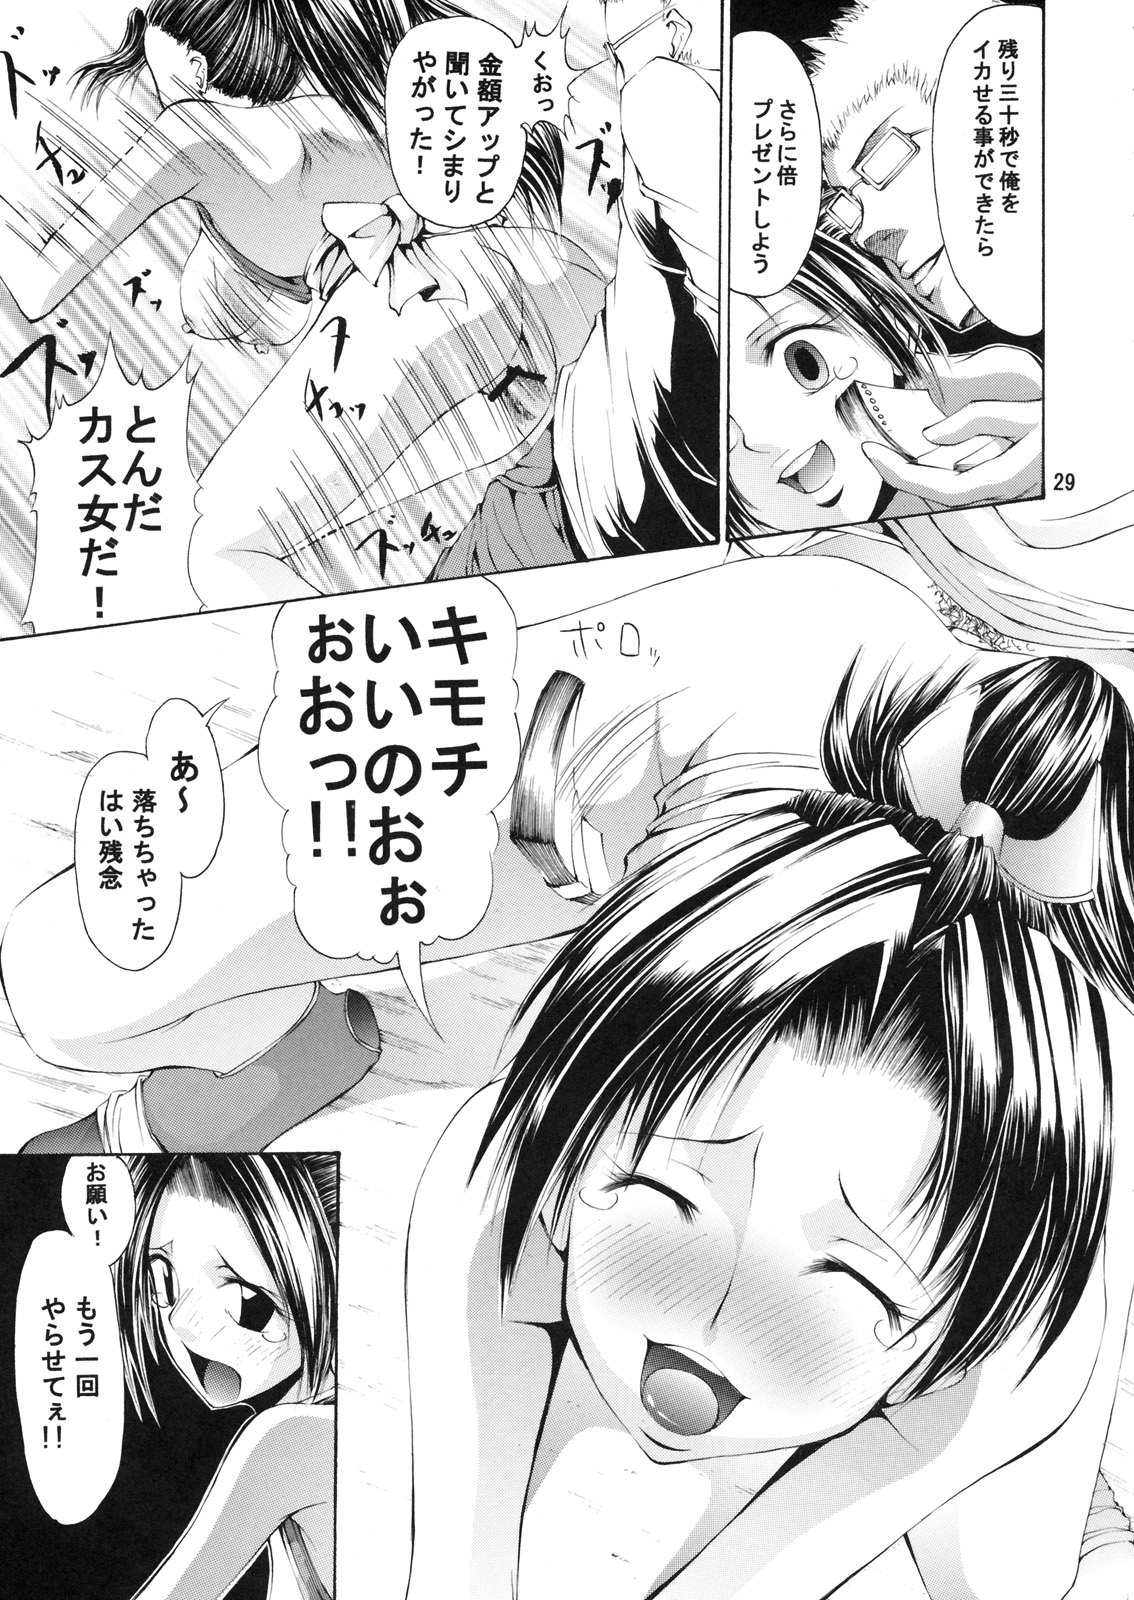 [3g (Junkie)] DOF Mai (King of Fighters) page 28 full